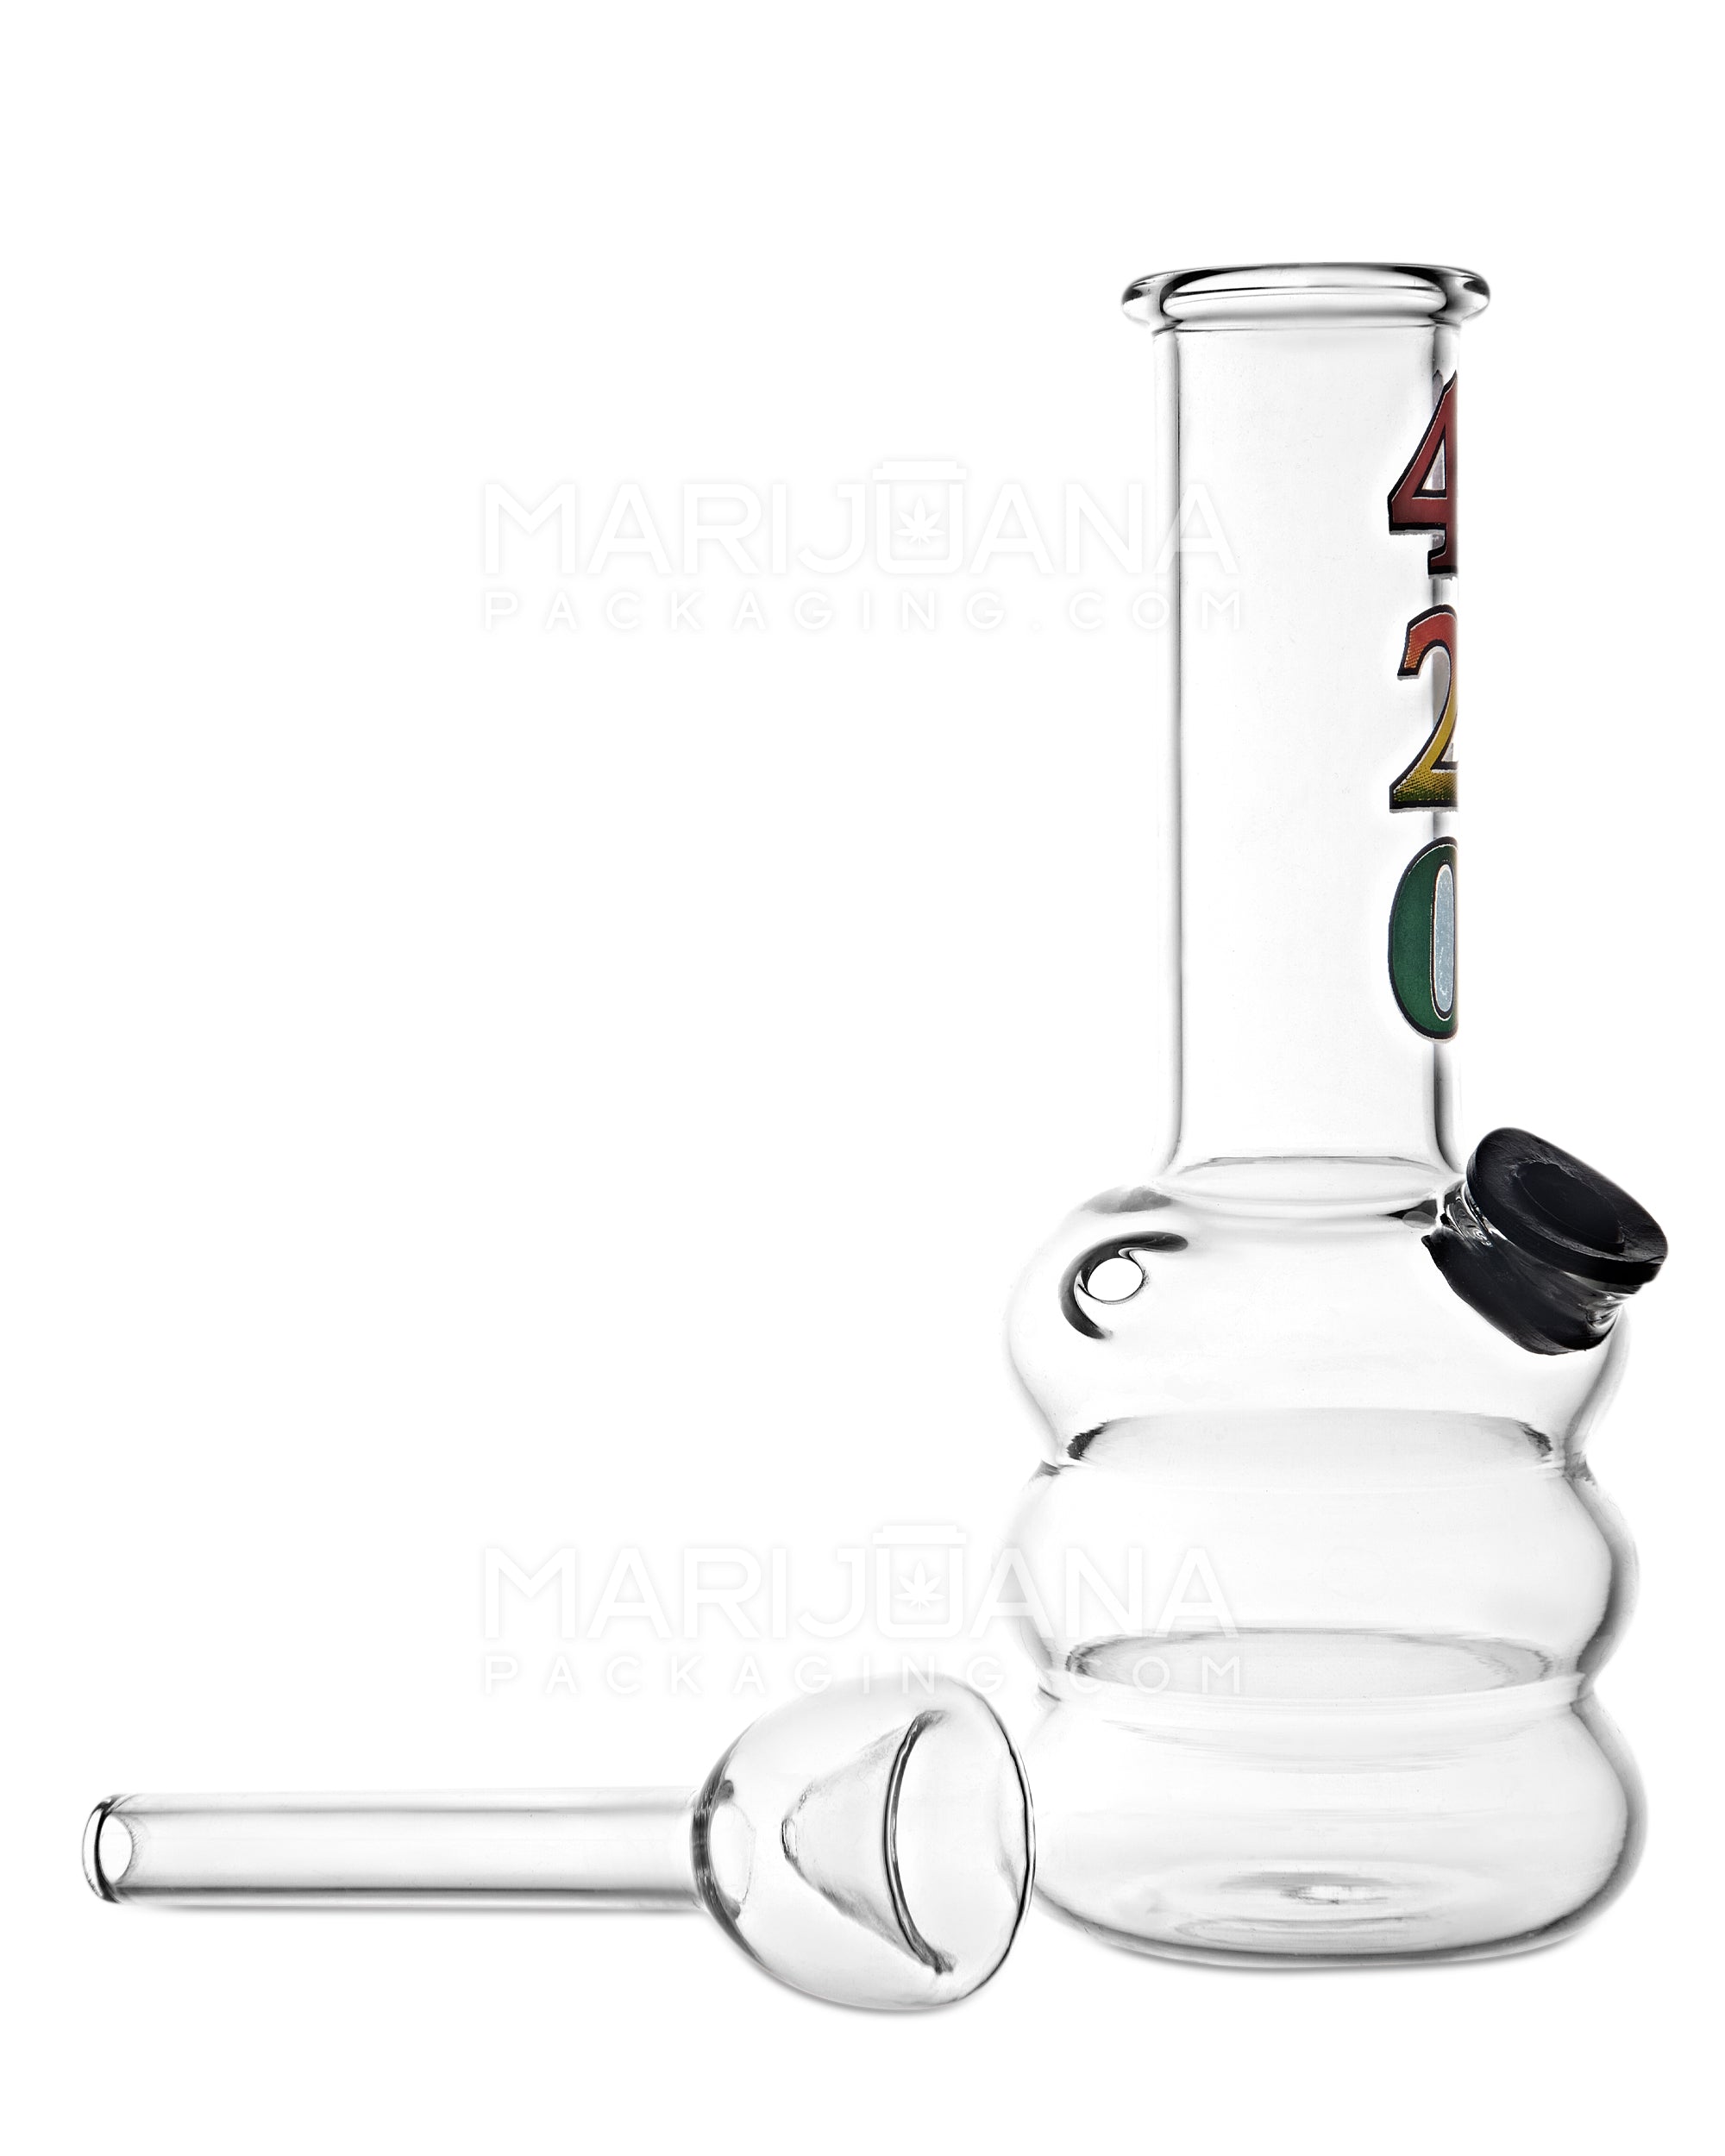 Straight Neck 420 Decal Glass Egg Water Pipe | 5in Tall - Grommet Bowl - Clear - 2